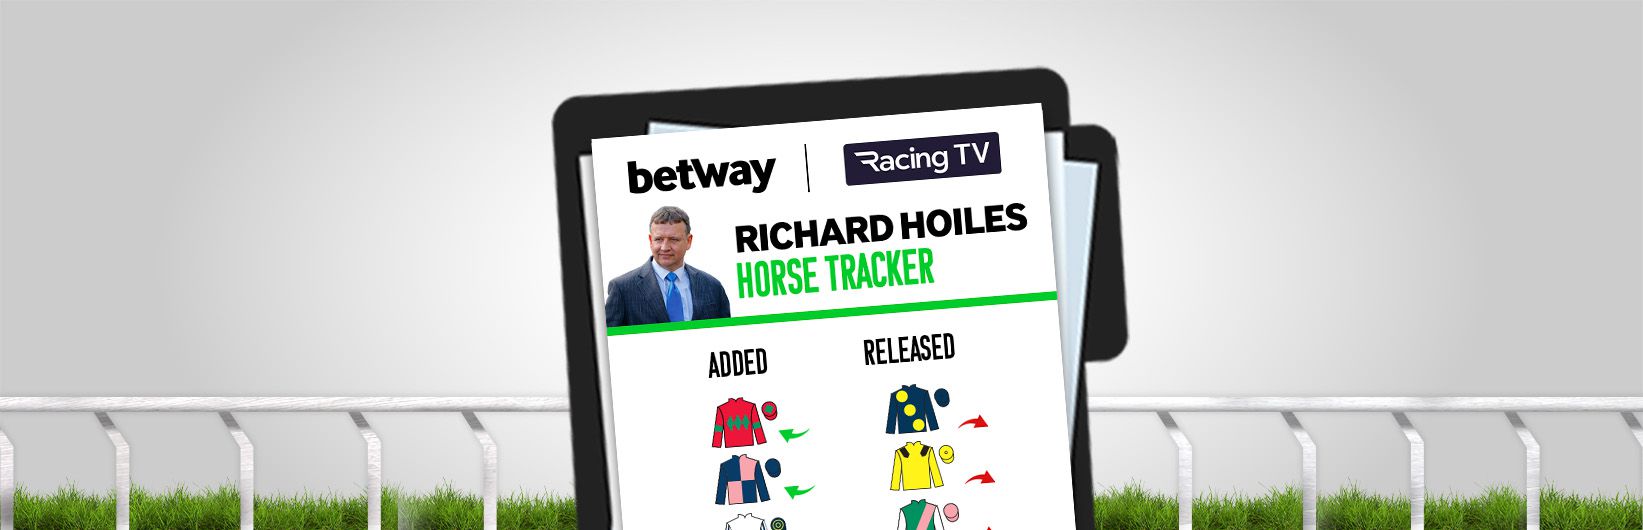 Richard Hoiles: 3 new additions to my horse tracker